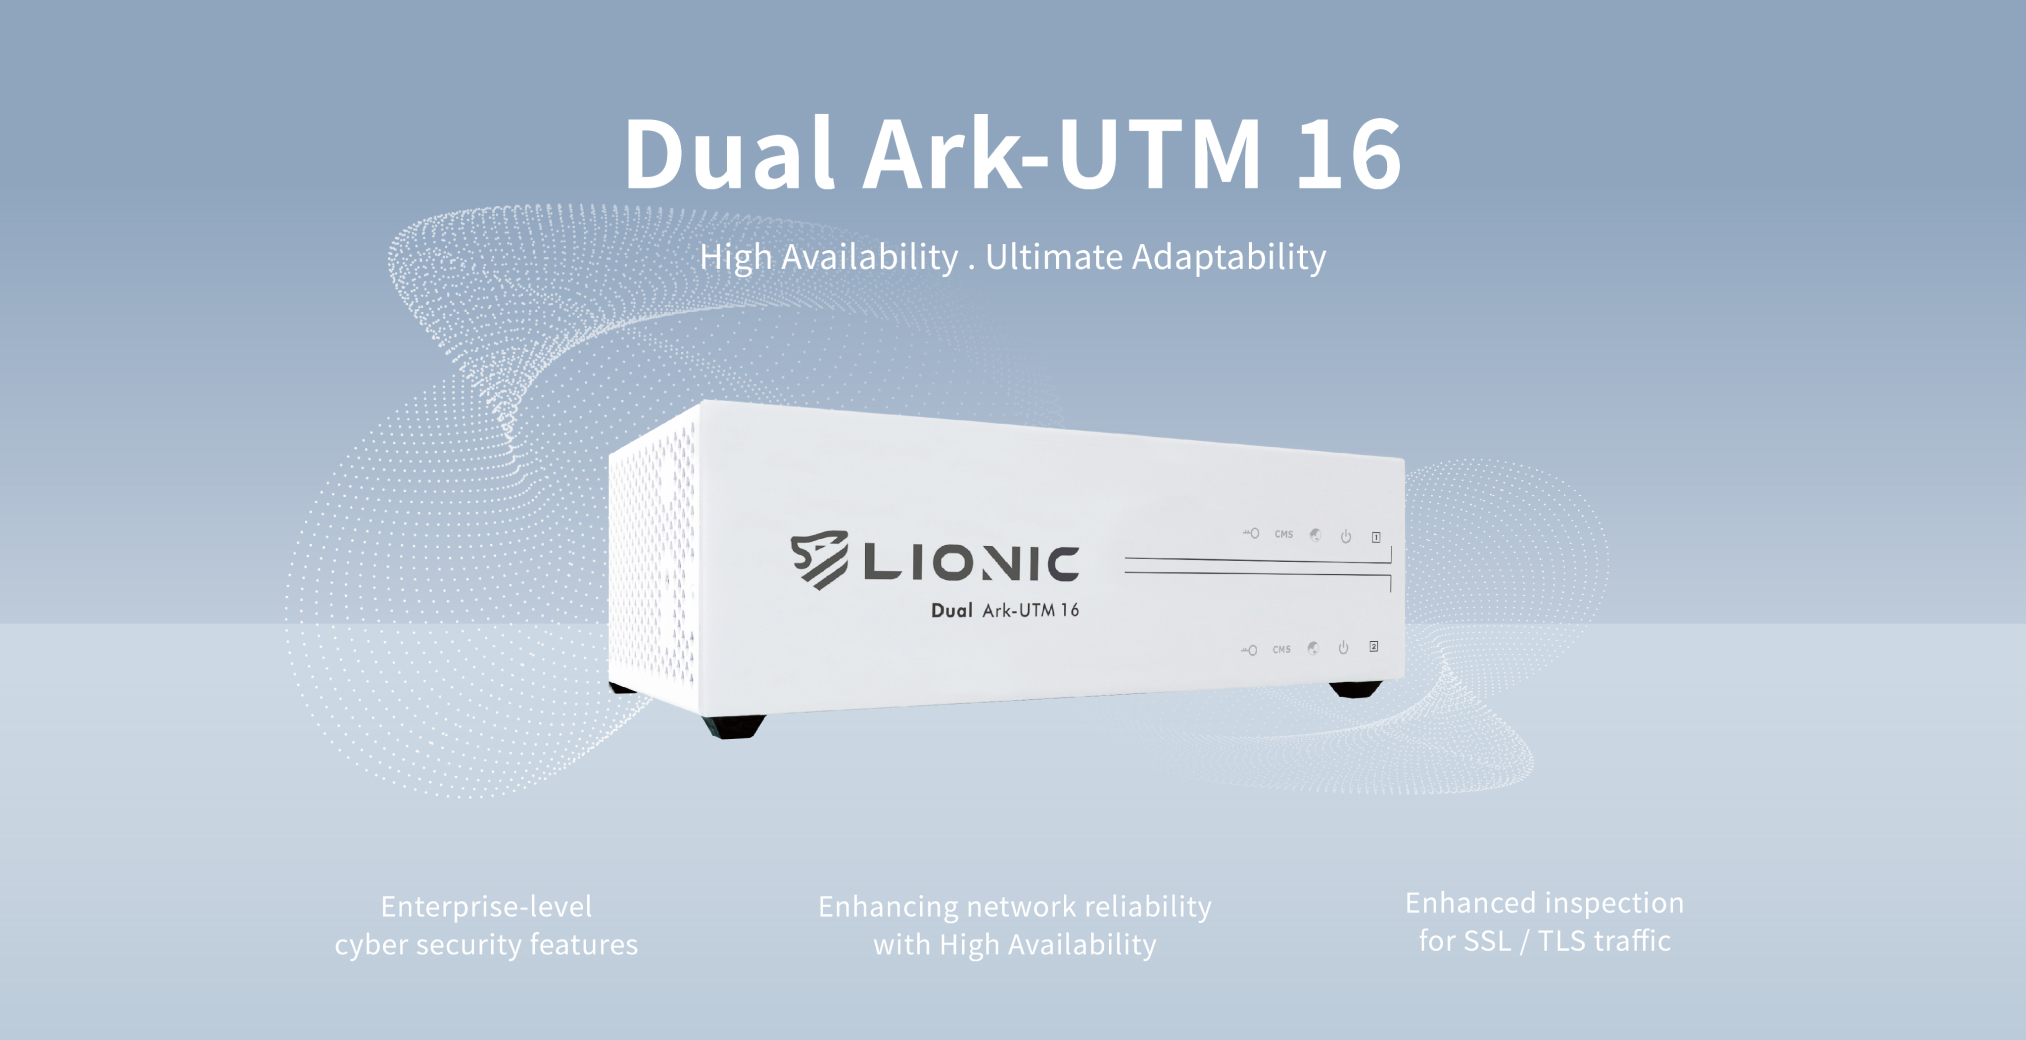 Dual Ark-UTM 16 Redefines Network Security and High Availability